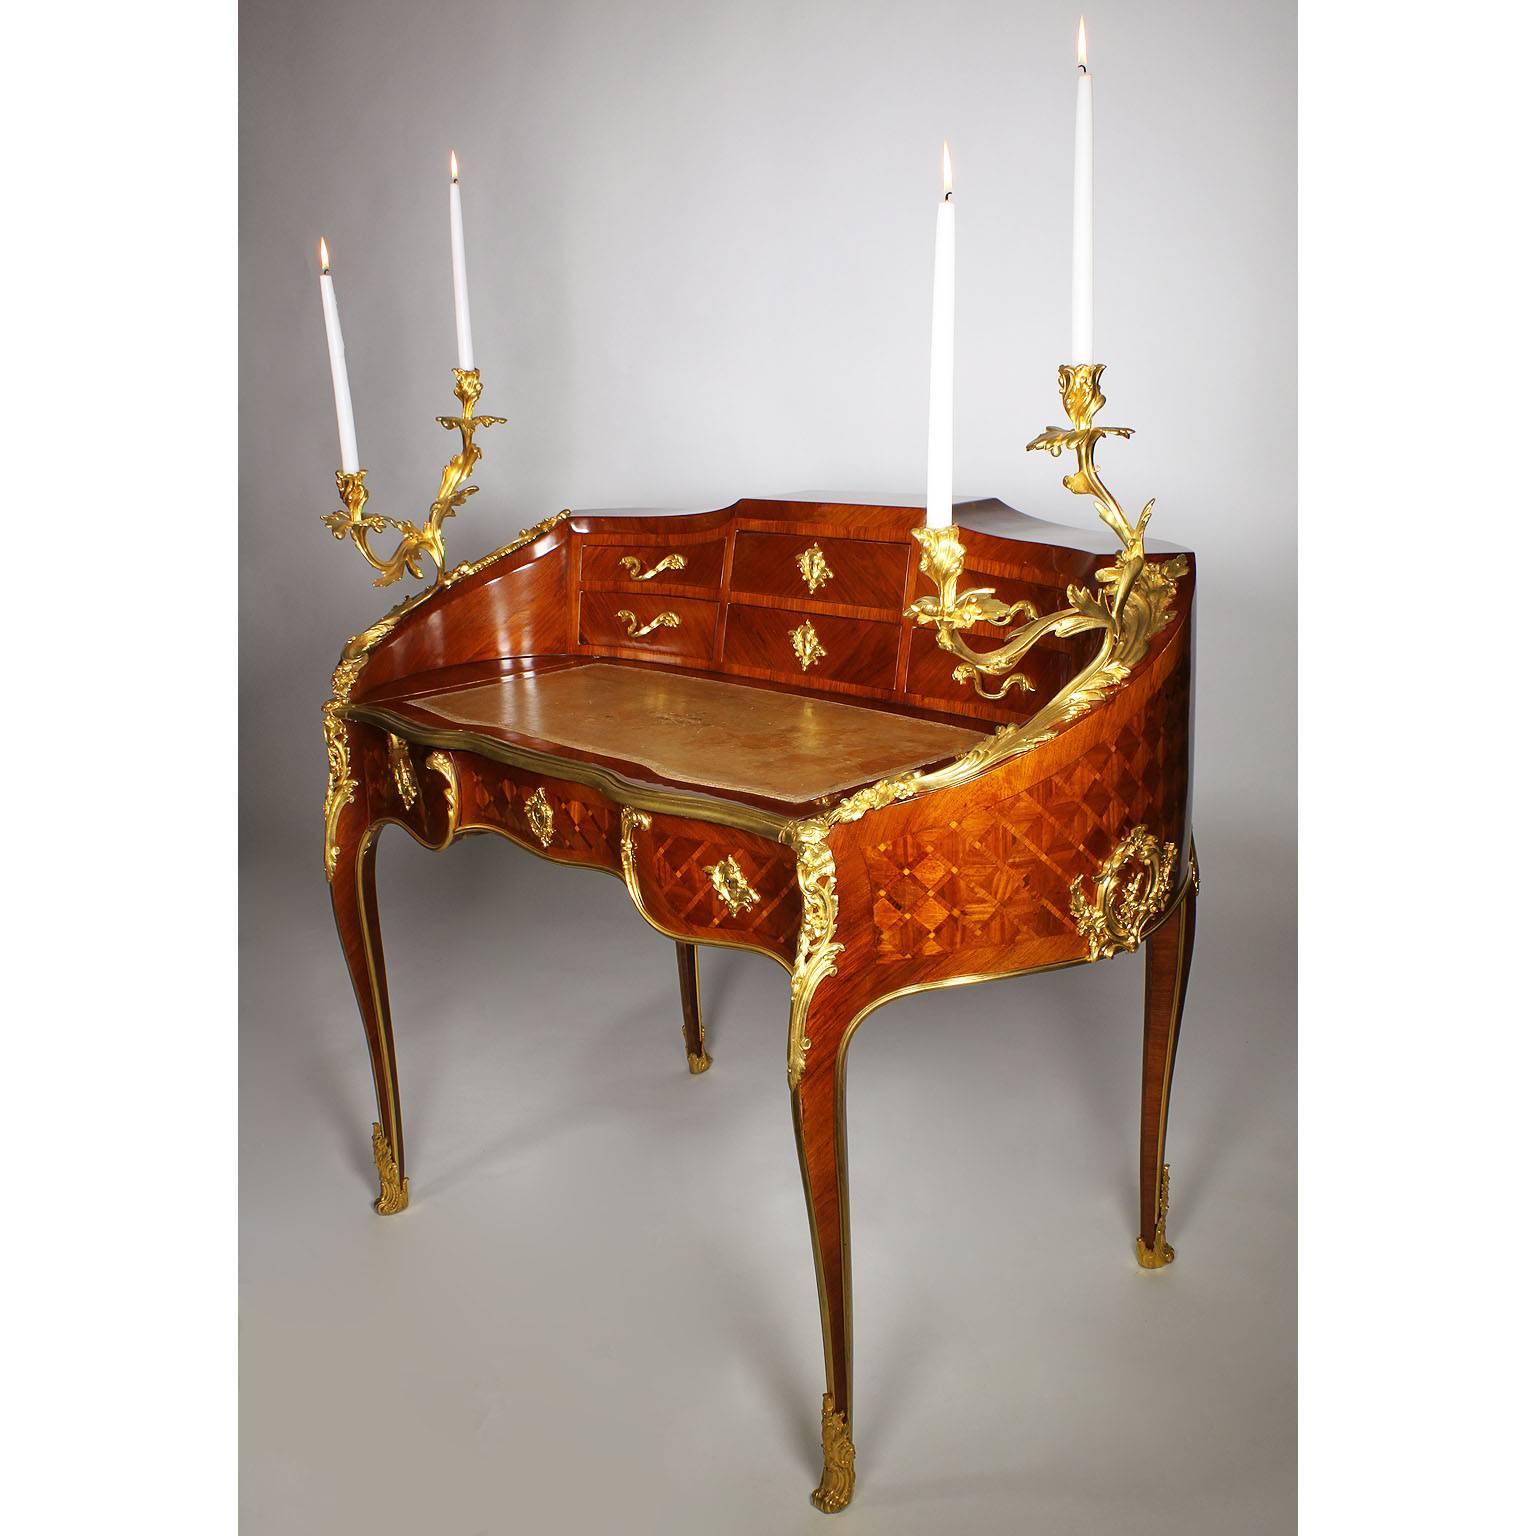 A very fine French 19th century Louis XV style gilt bronze-mounted kingwood and tulipwood parquetry decorated bombé secretary bureau-plat, attributed to Maison Millet. The kidney shaped body surmounted with a pair of two-light gilt bronze scrolled